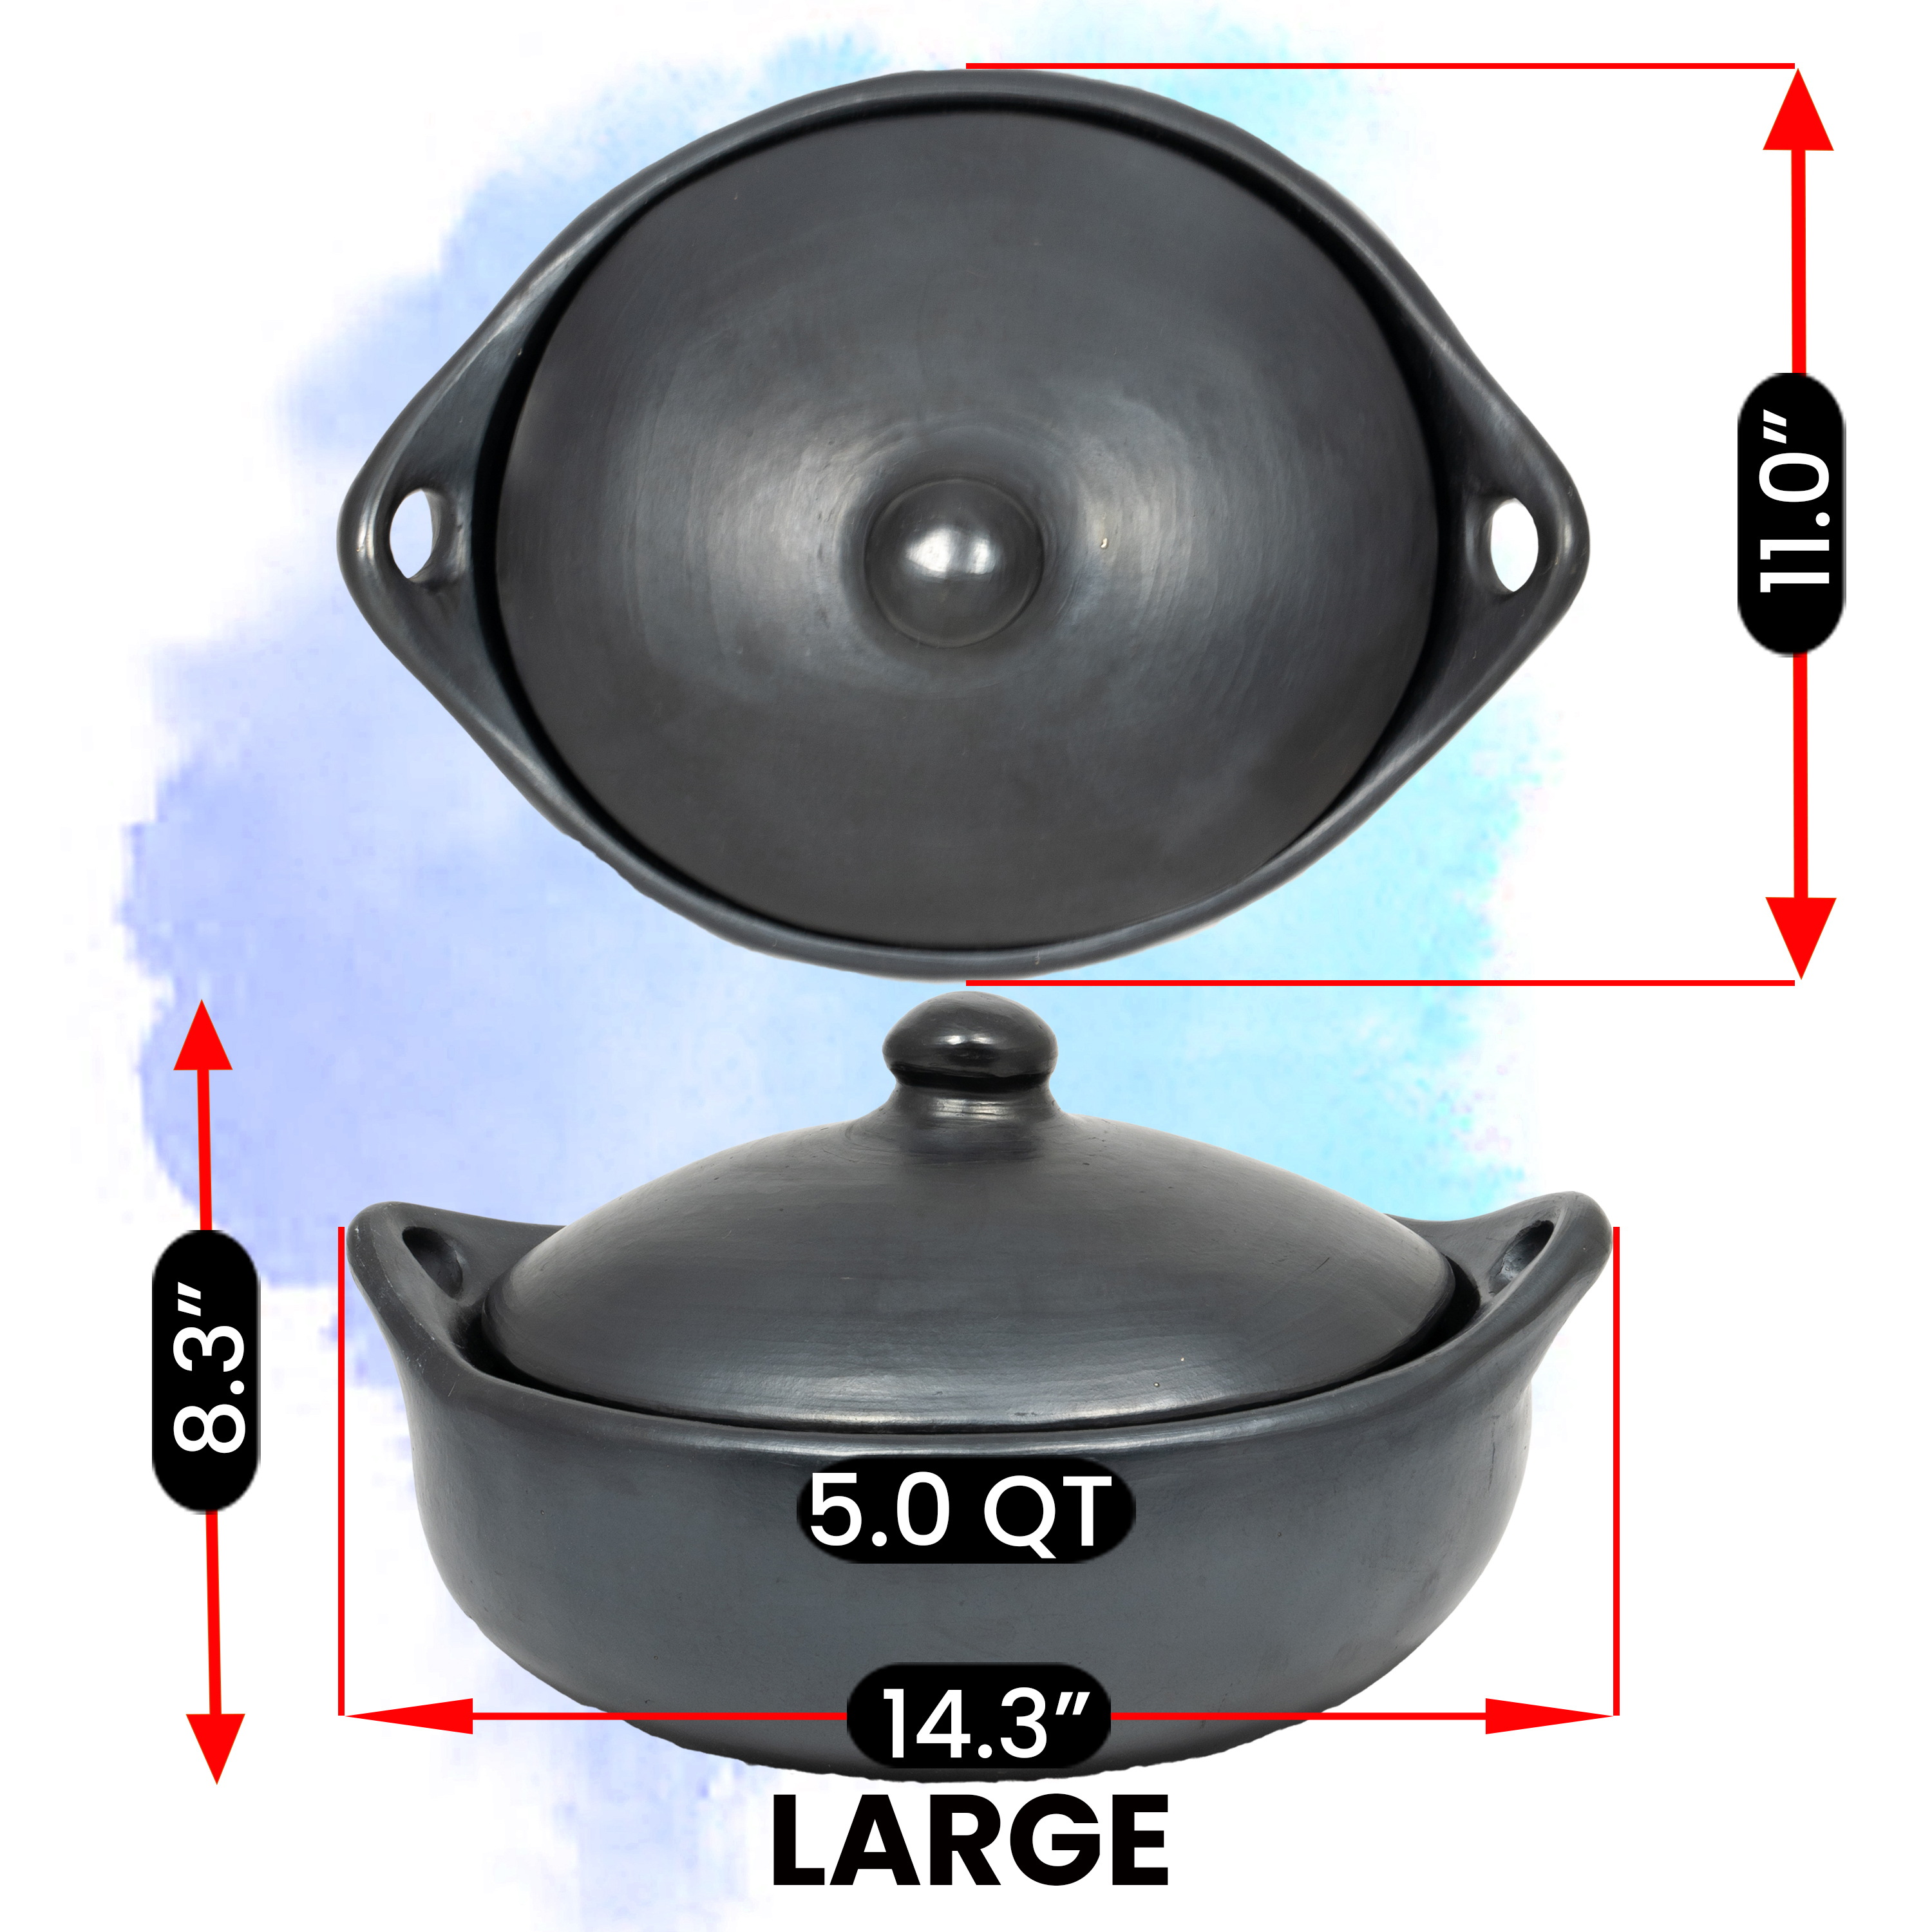 https://ancientcookware.com/images/stories/virtuemart/product/col_1012_14_Large_with_measurements.jpg